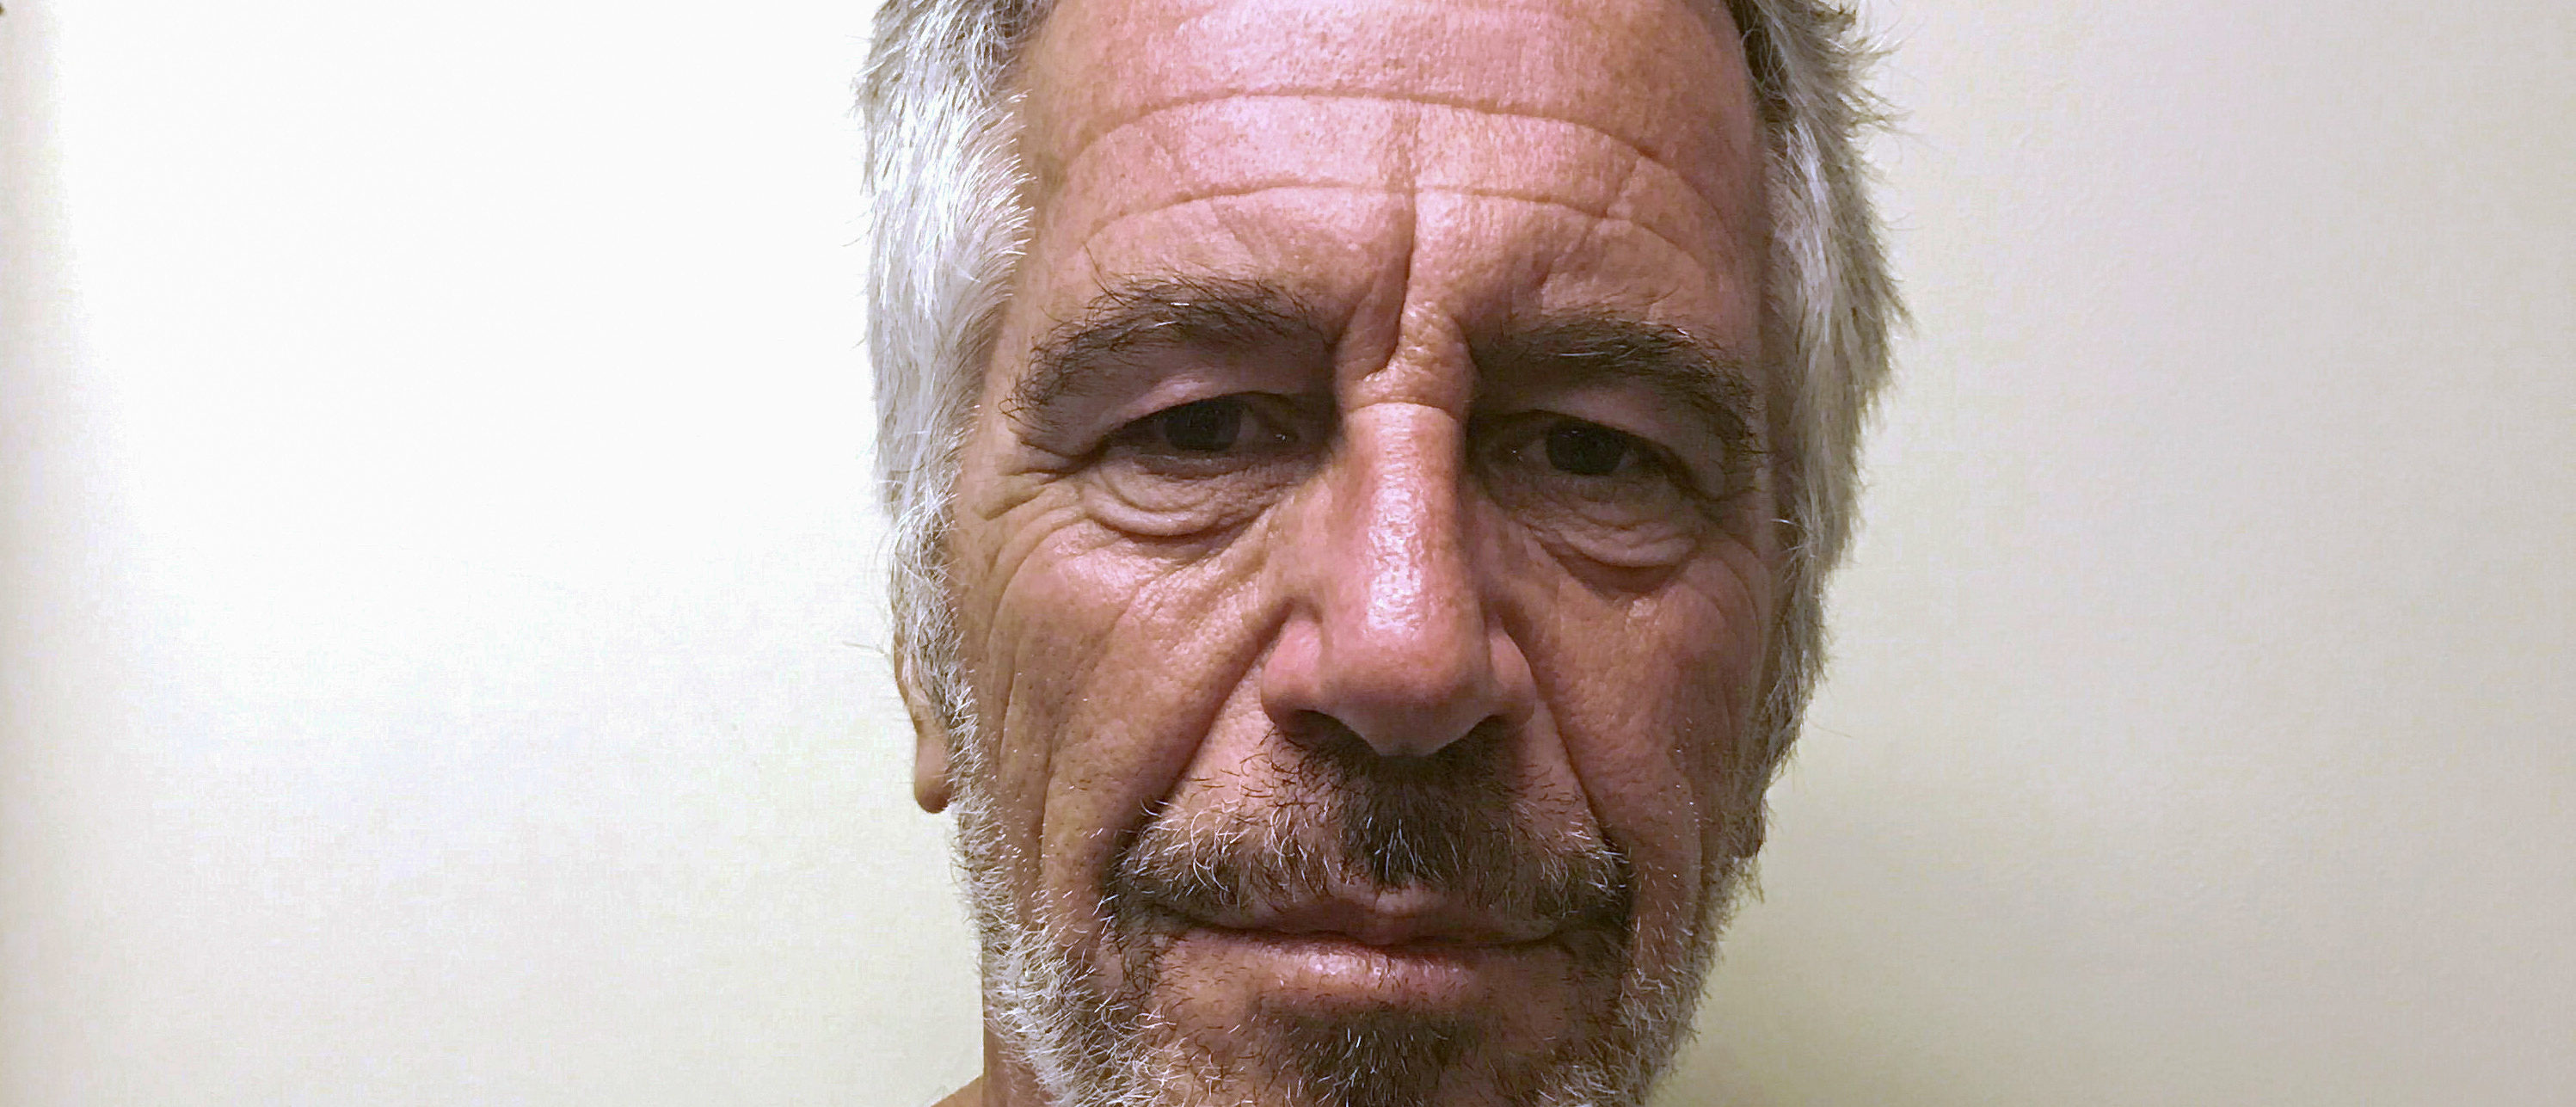 U.S. financier Jeffrey Epstein appears in a photograph taken for the New York State Division of Criminal Justice Services' sex offender registry March 28, 2017 and obtained by Reuters July 10, 2019. (New York State Division of Criminal Justice Services/Handout via REUTERS)